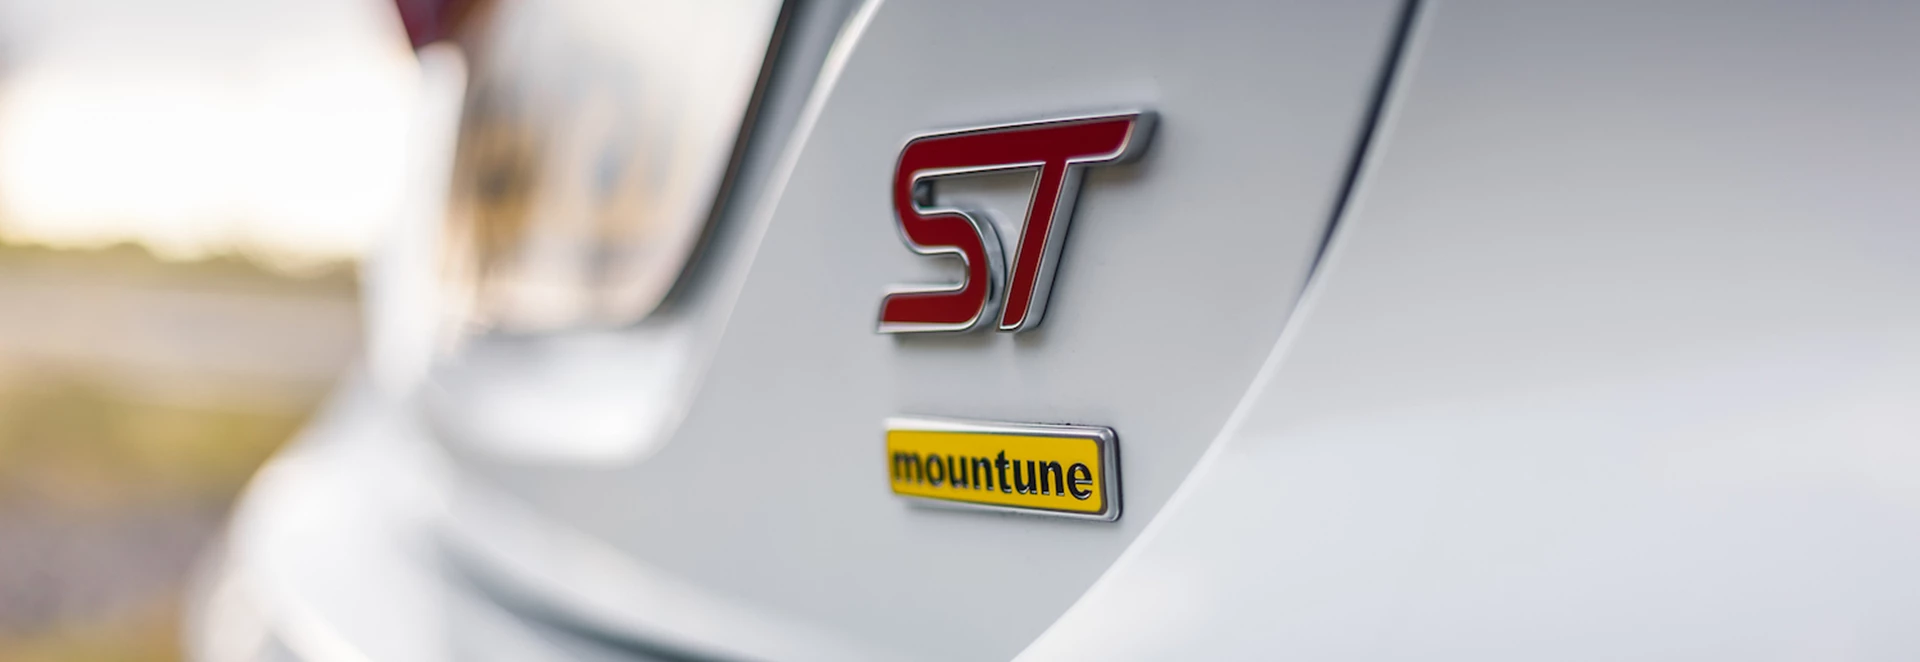 Mountune reveals Ford Fiesta ST upgrade and app